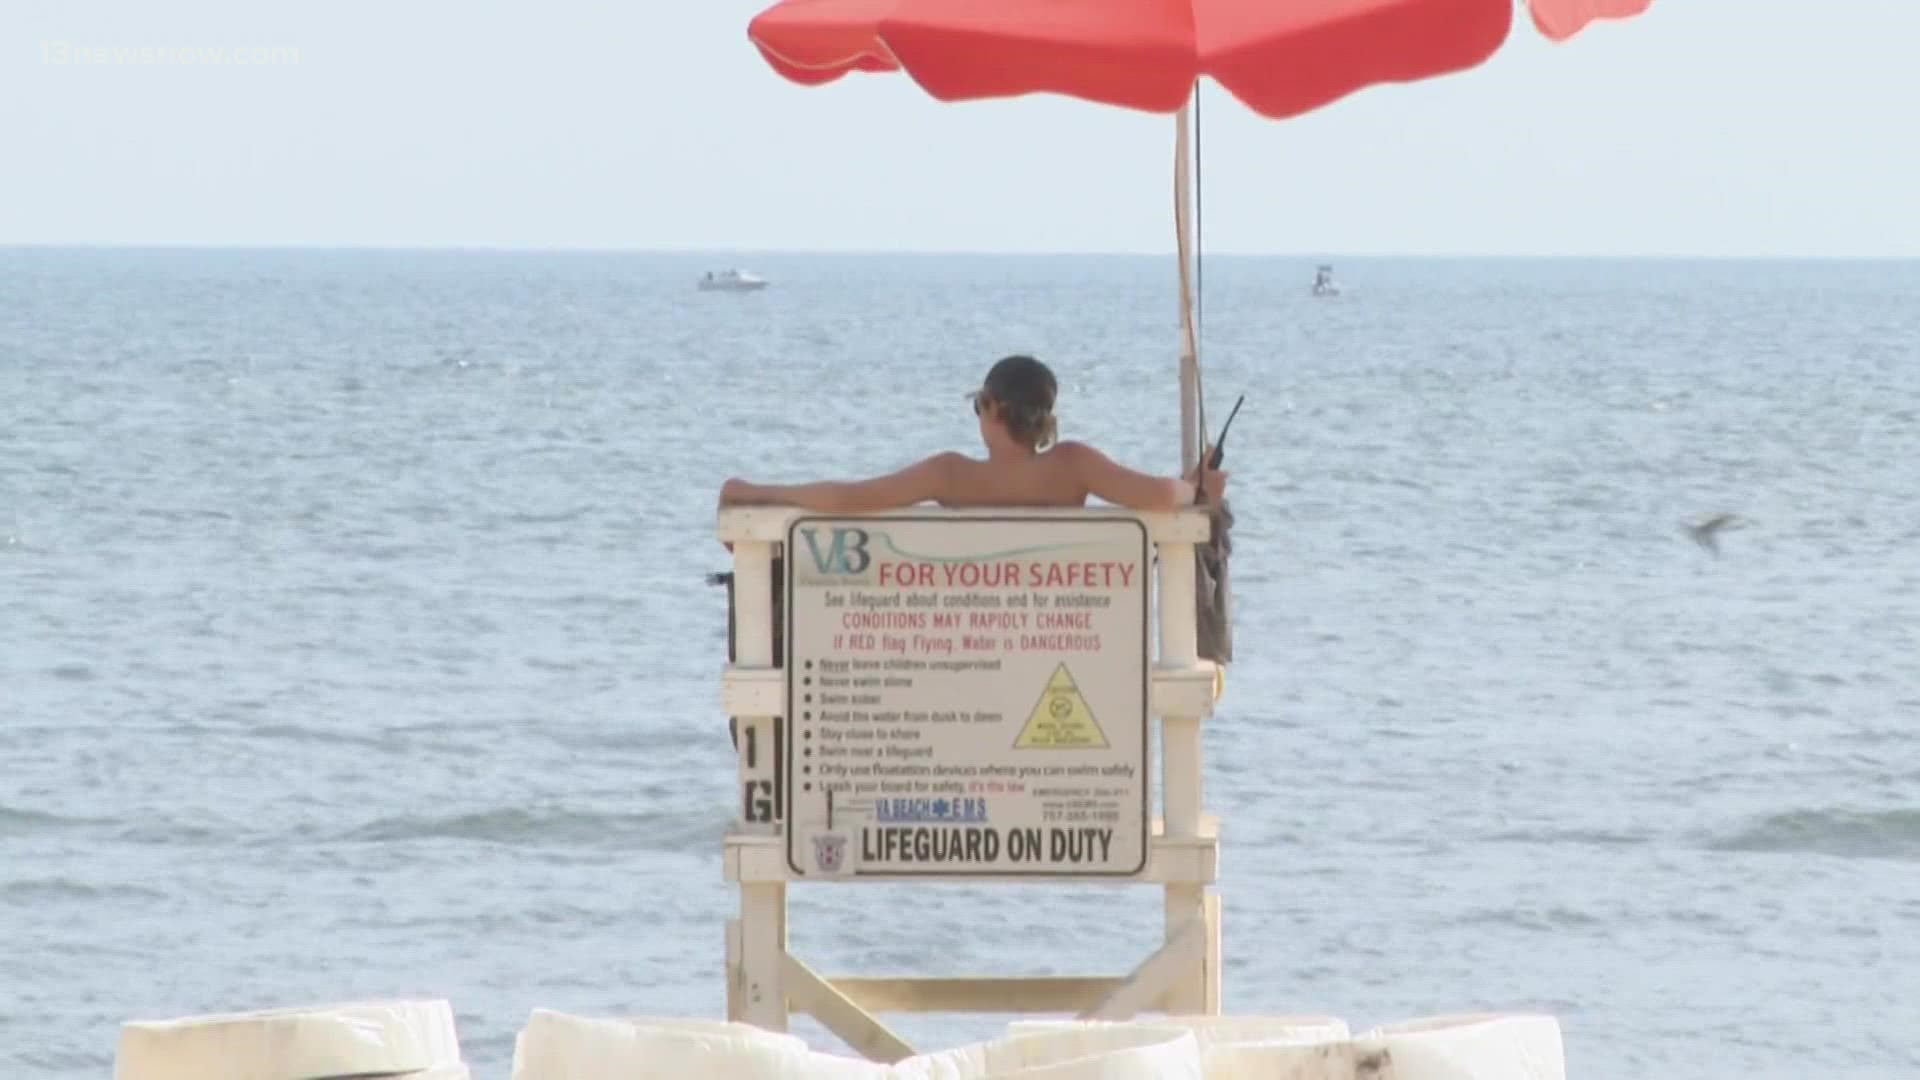 The Virginia Beach lifeguarding service pulled about 25 people out of the water for rip currents over Labor Day weekend.